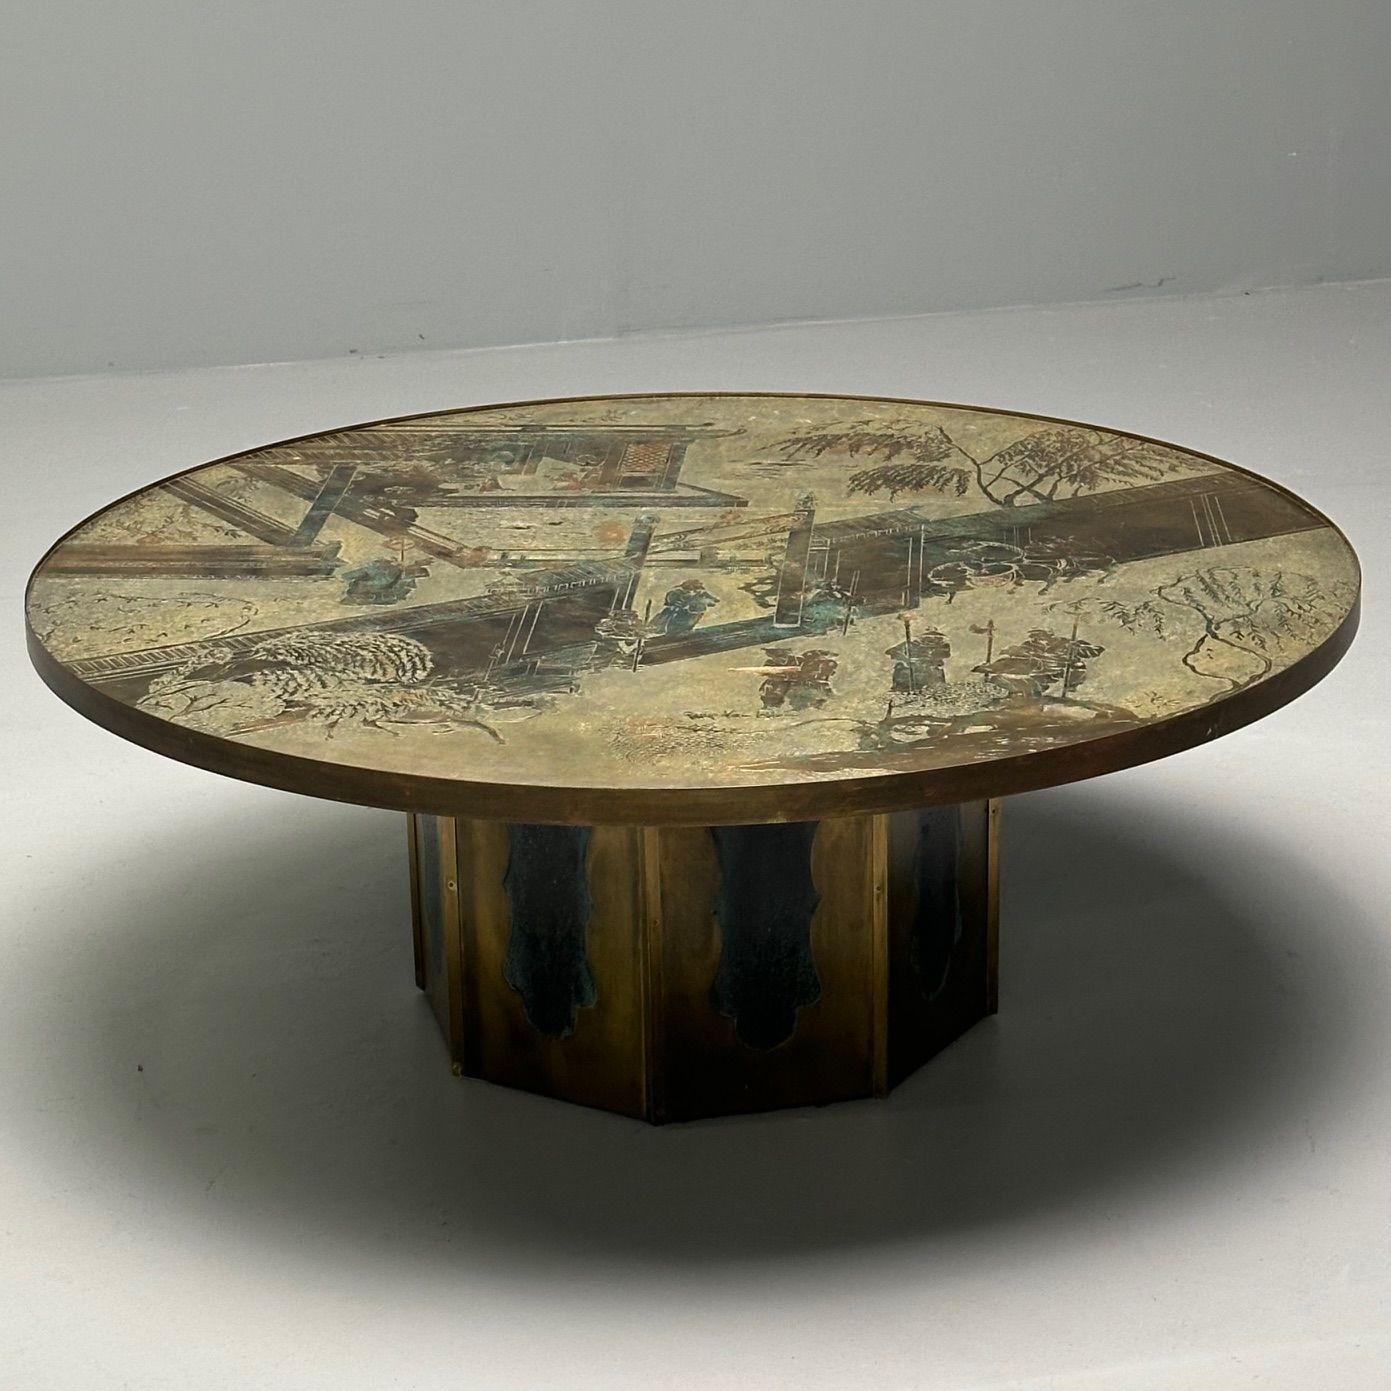 Philip and Kelvin Laverne, Mid-Century Modern, Chan Coffee Table, Bronze, 1960s

Wonderful example of an engraved and patinated bronze-clad wood 'Chan' coffee table by Philip and Kelvin Laverne. Work by the father son design duo has been steadily